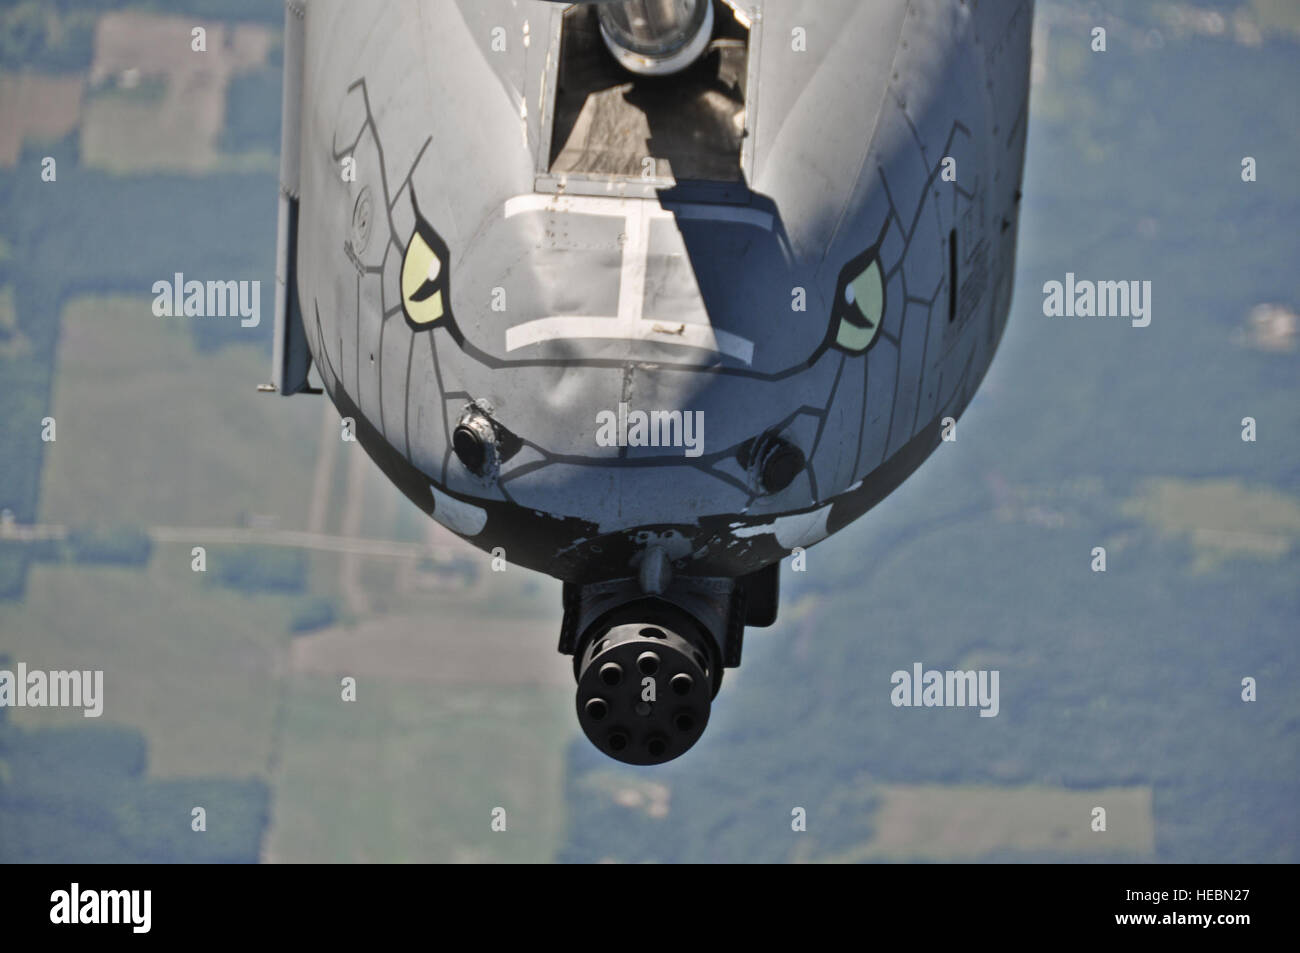 An A-10 Thunderbolt II from Selfridge Air National Guard Base, MI, displaying serpentine noseart around the 30 mm GAU-8/A Gatling Gun while being mid-air refueled during a boss lift and training flight over Michigan on July 11, 2012. The A-10 host an assortment of armament, with the GAU-8/A cannon able to dispense 3,900 rounds per minute. U.S. Air Force Photo by: Staff Sgt. Jeremy M. Wilson Stock Photo